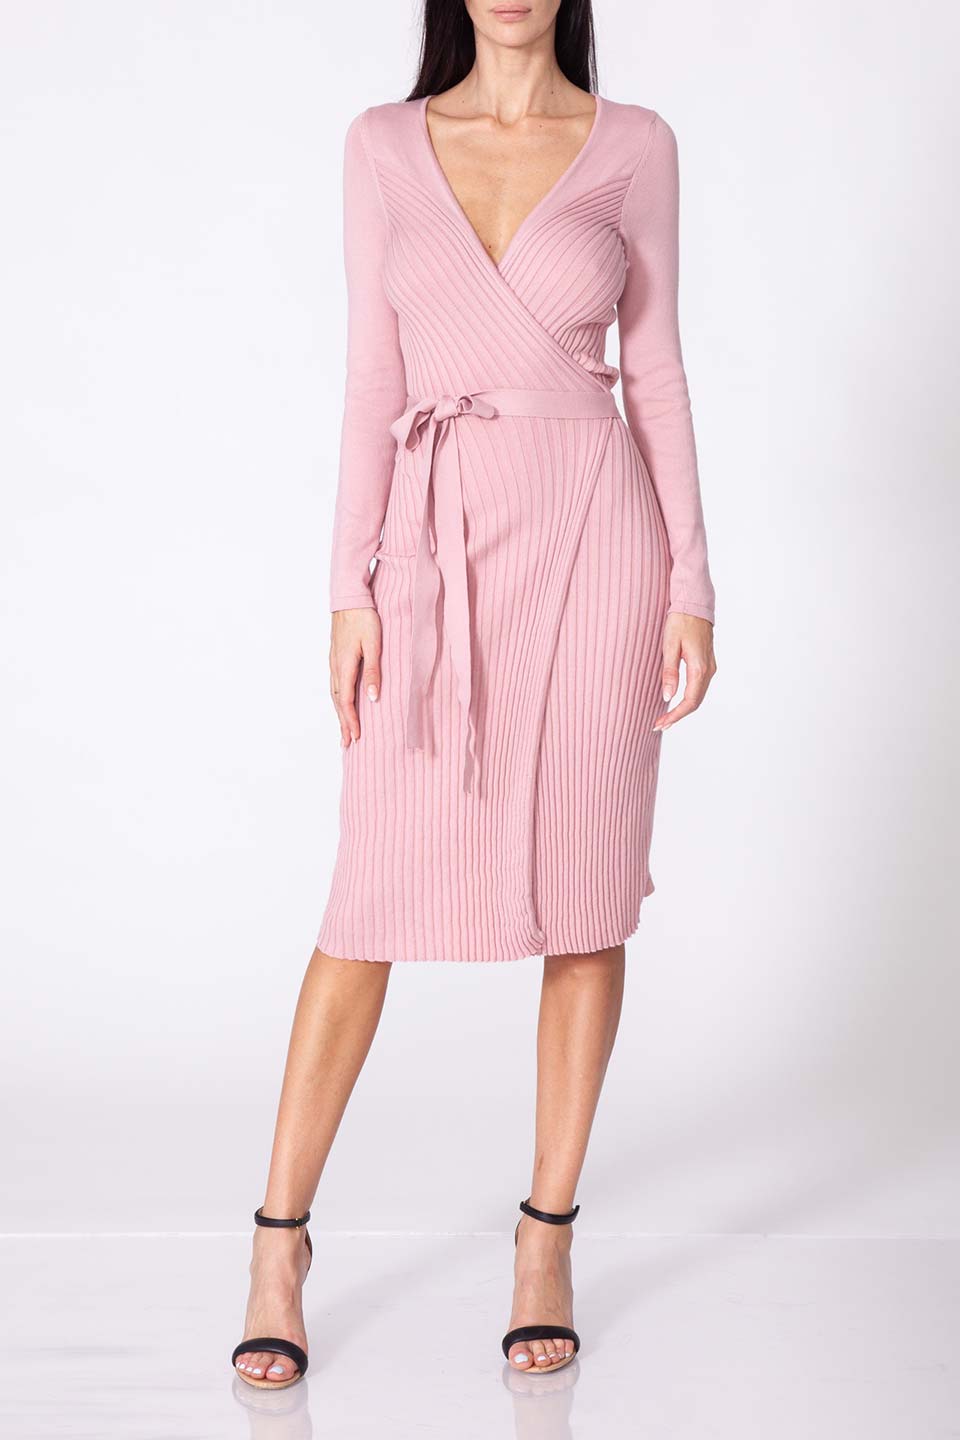 Shop online cashmere dress from fashion designer. Product gallery 1